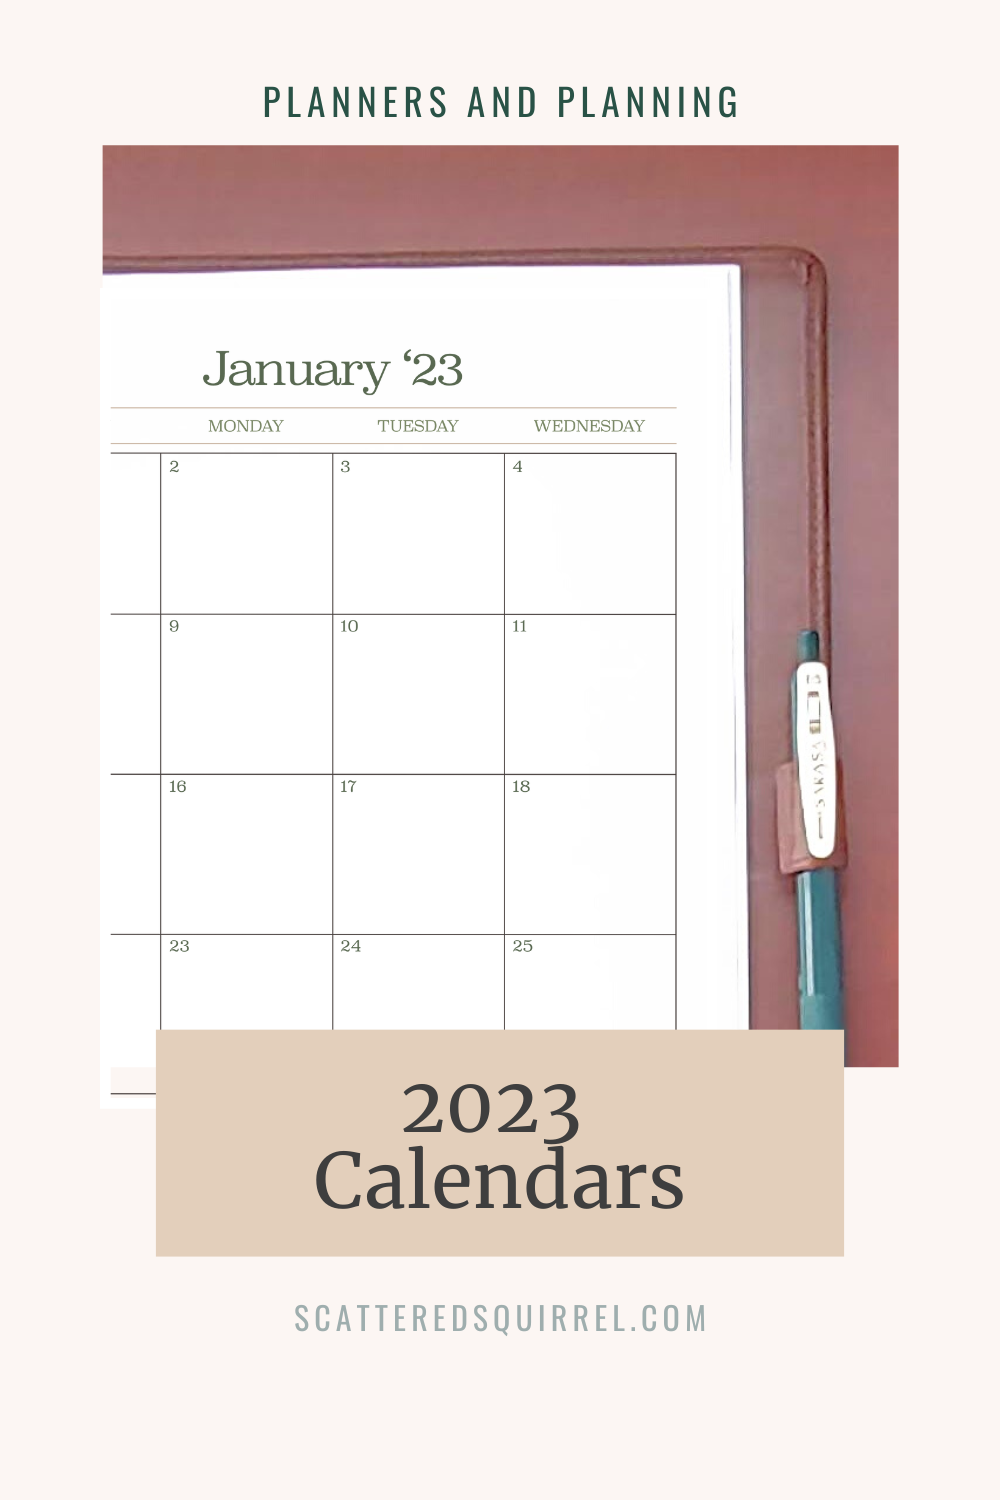 The 2023 Calendar Printables are Here!